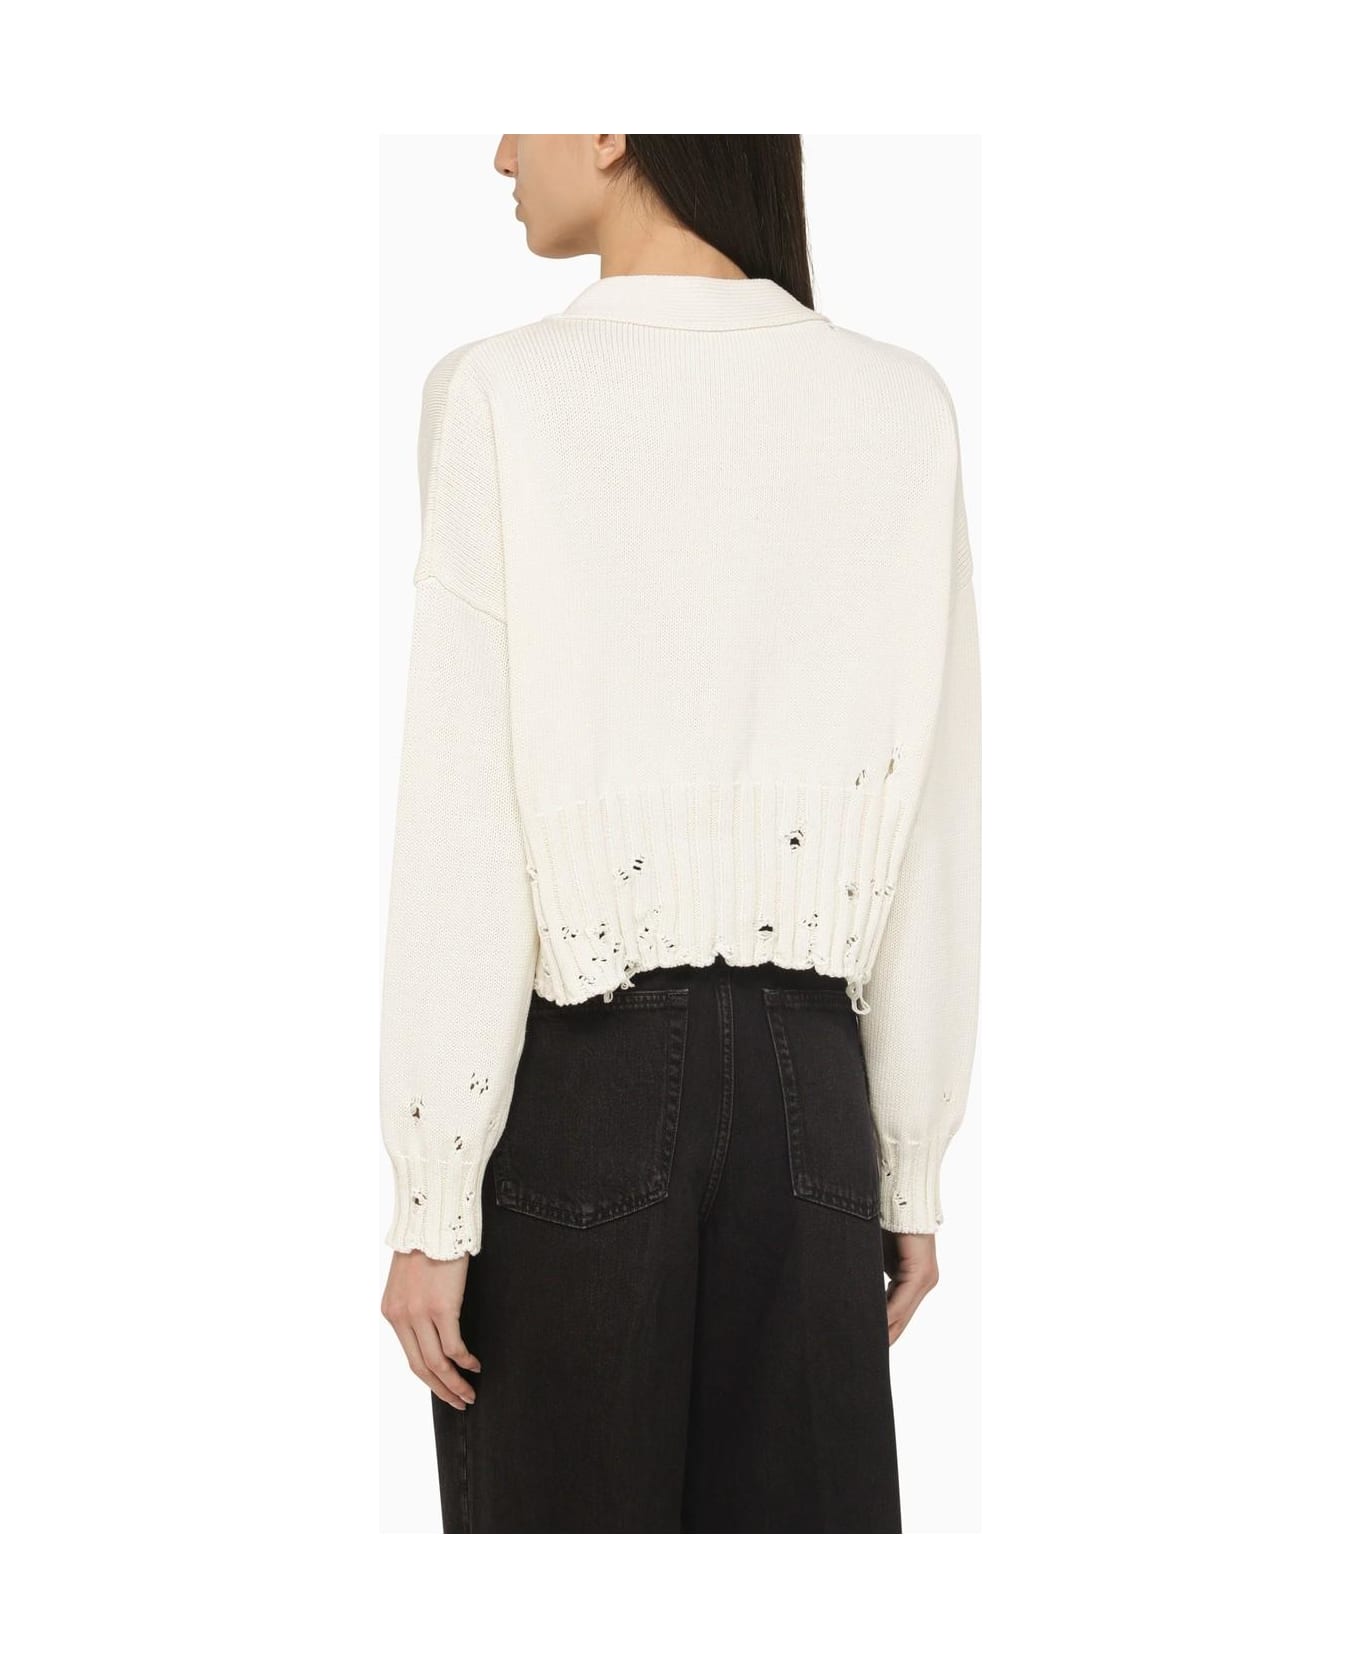 Marni Short Cardigan With White Cotton Wears - White